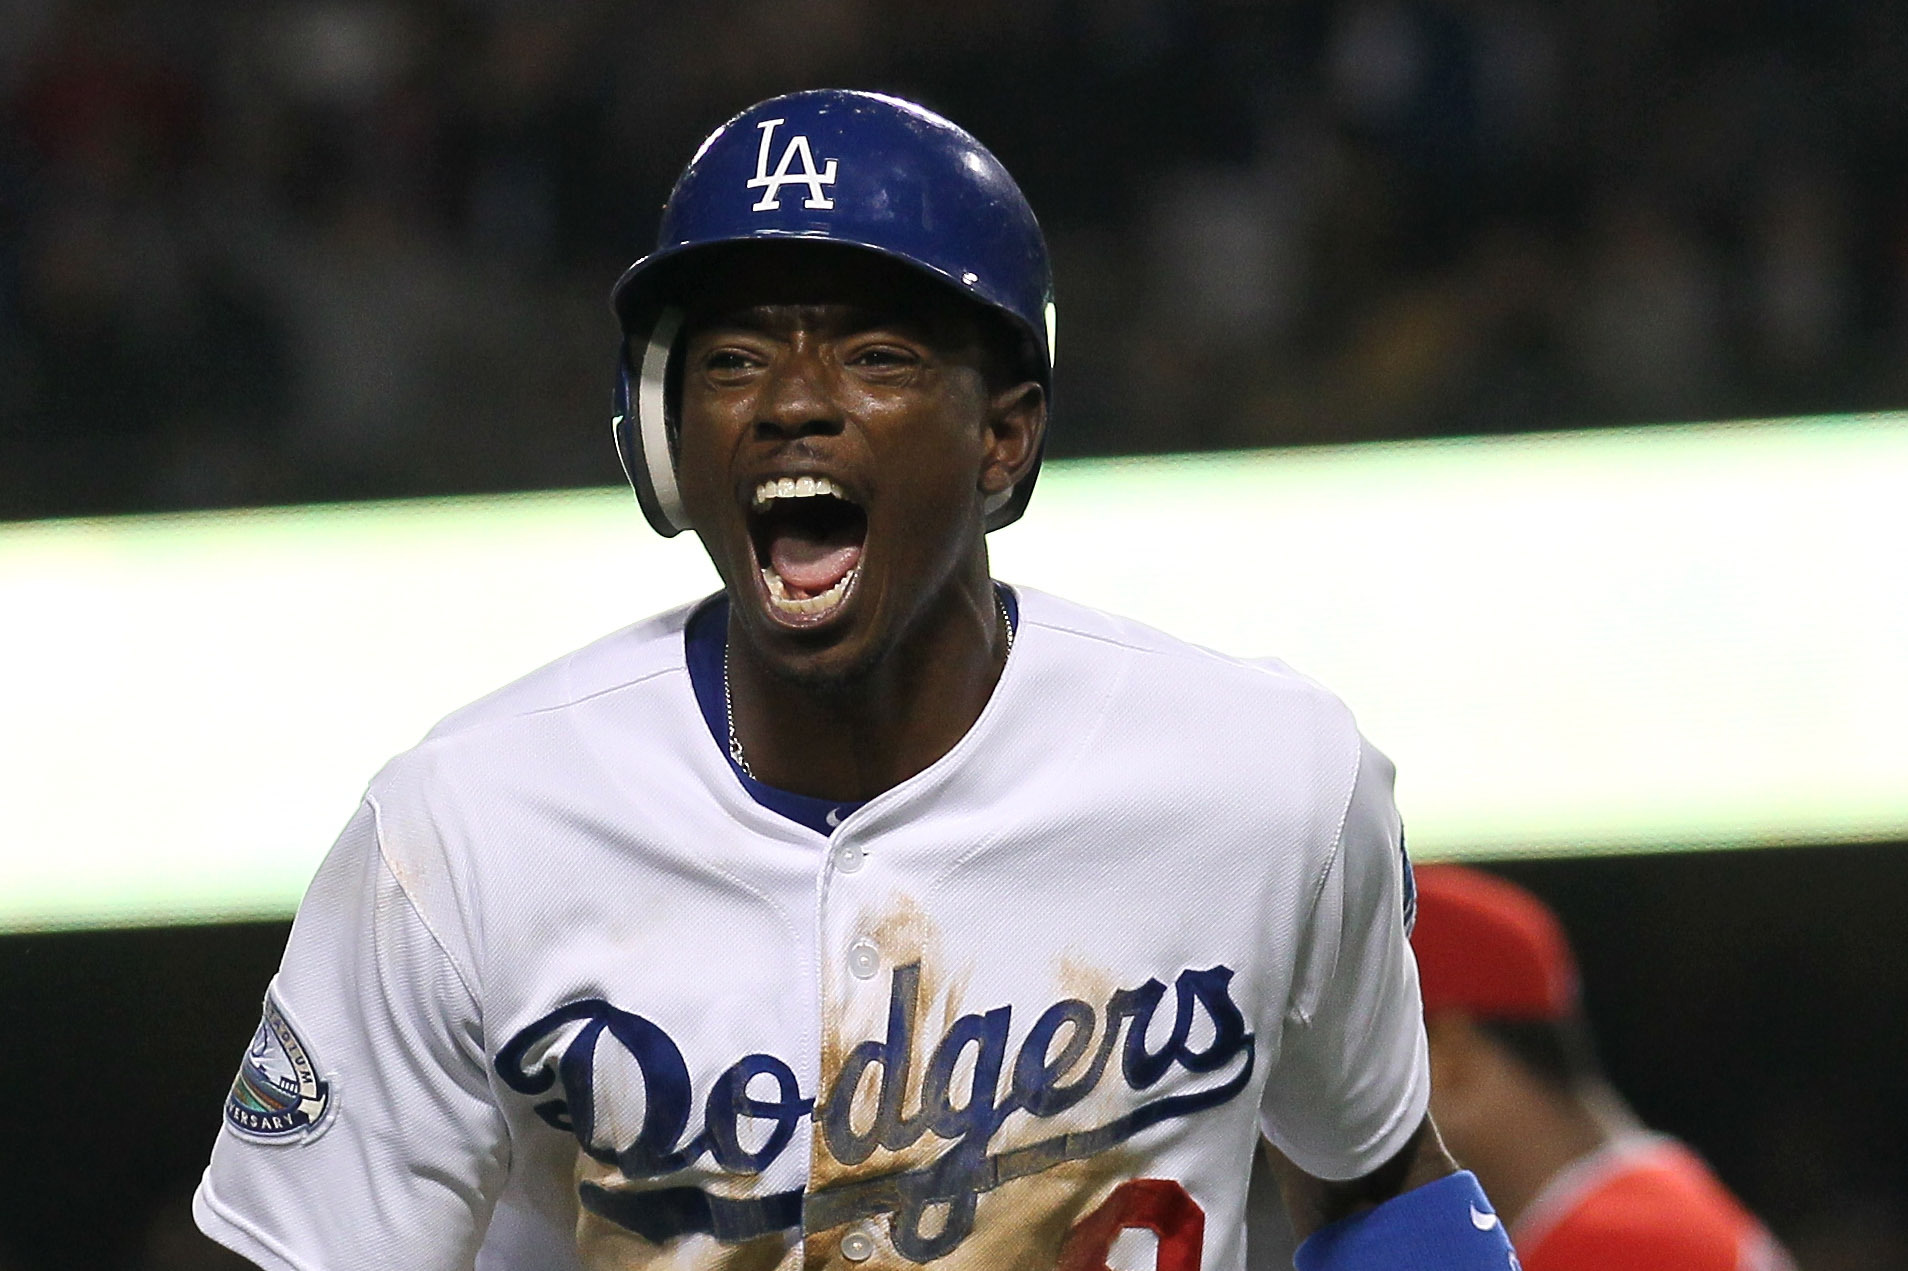 L.A. Dodgers: Why They Cannot Afford to Keep Playing Dee Gordon